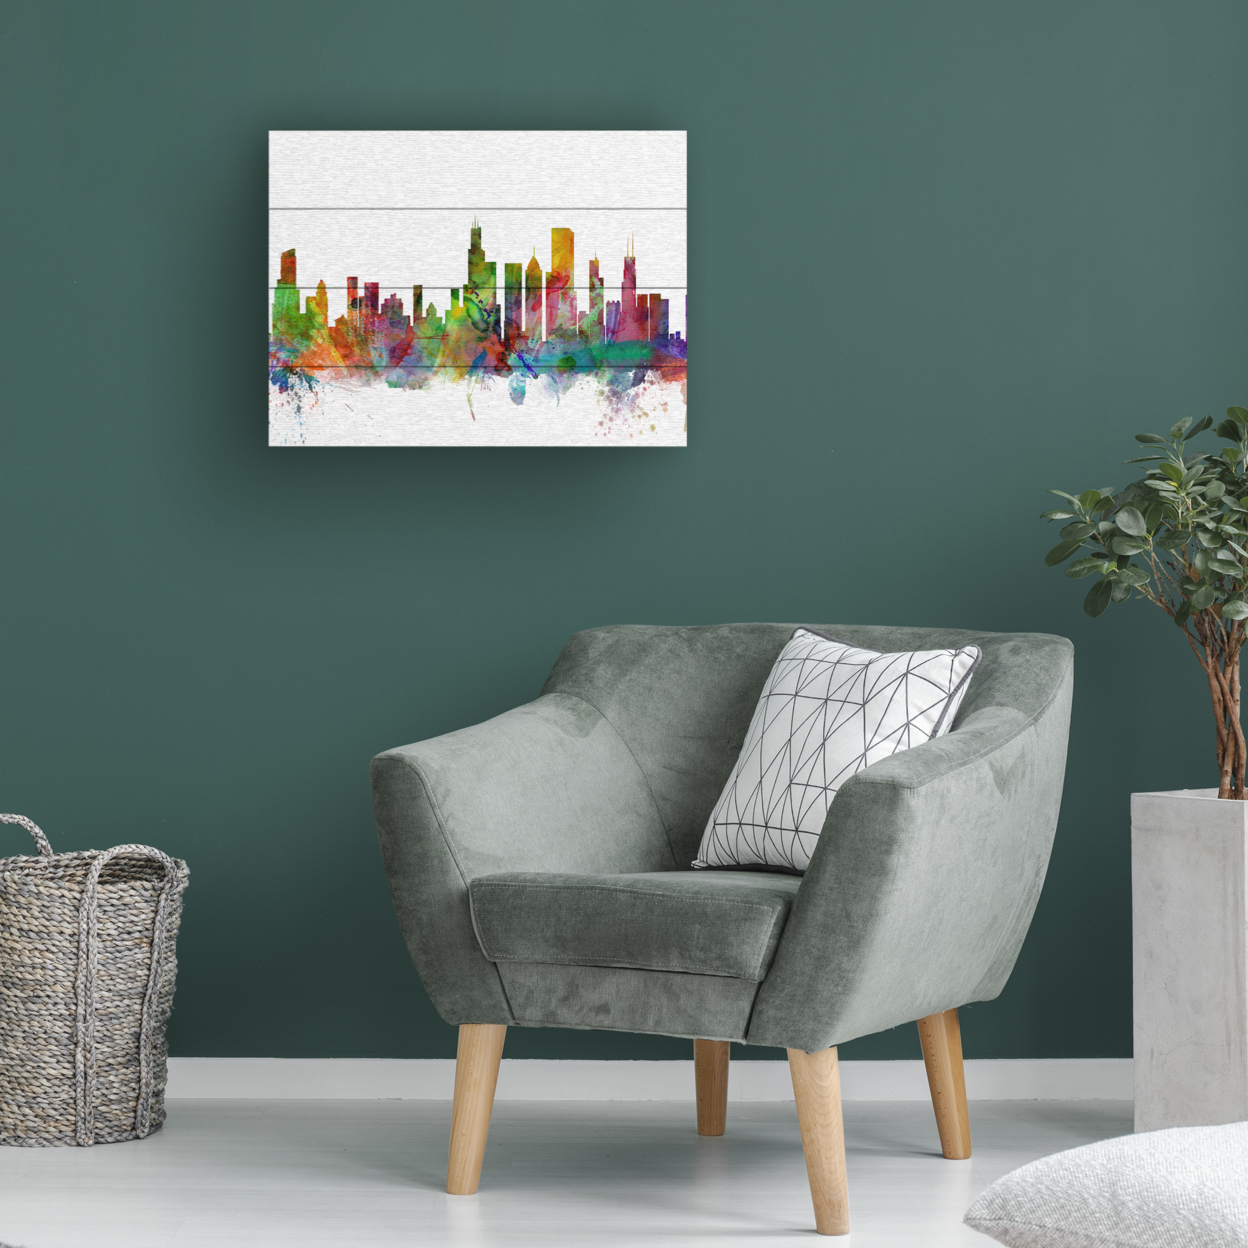 Wall Art 12 X 16 Inches Titled Chicago Illinois Skyline Ready To Hang Printed On Wooden Planks